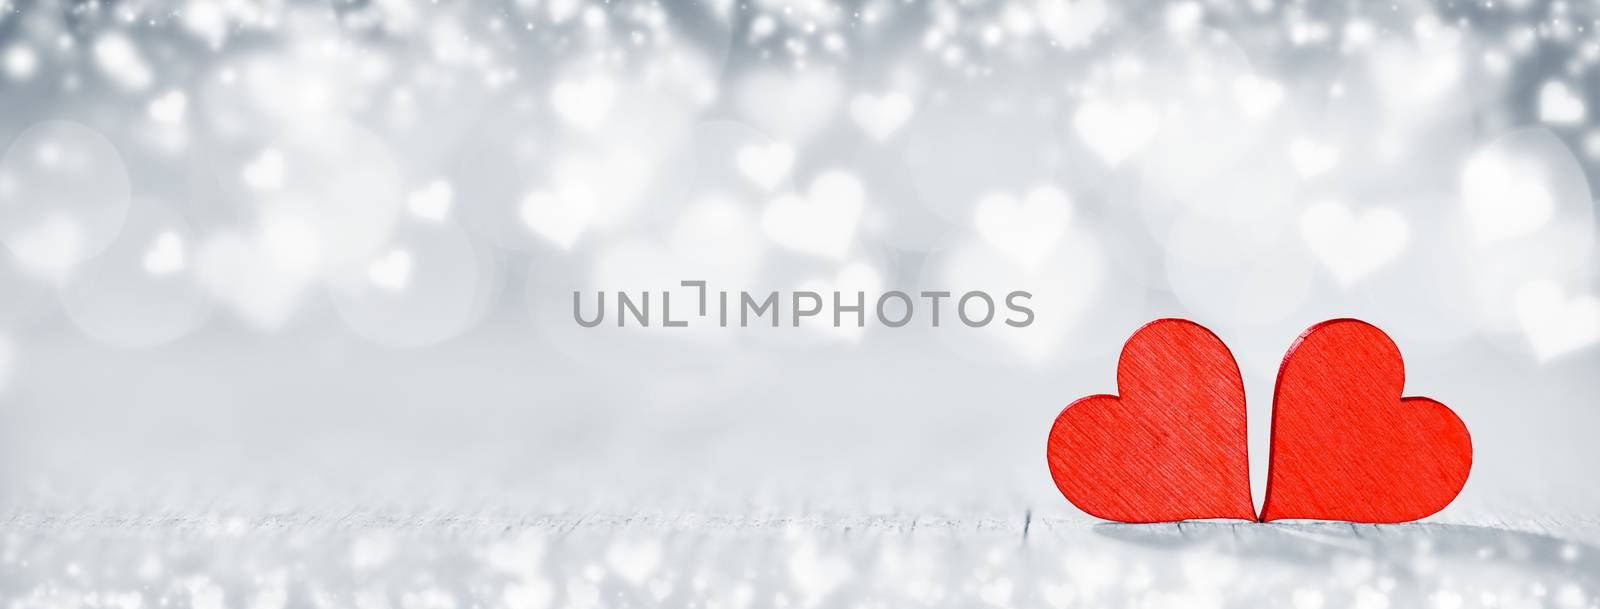 Two wooden hearts on silver glowing bokeh hearts background for Valentines day